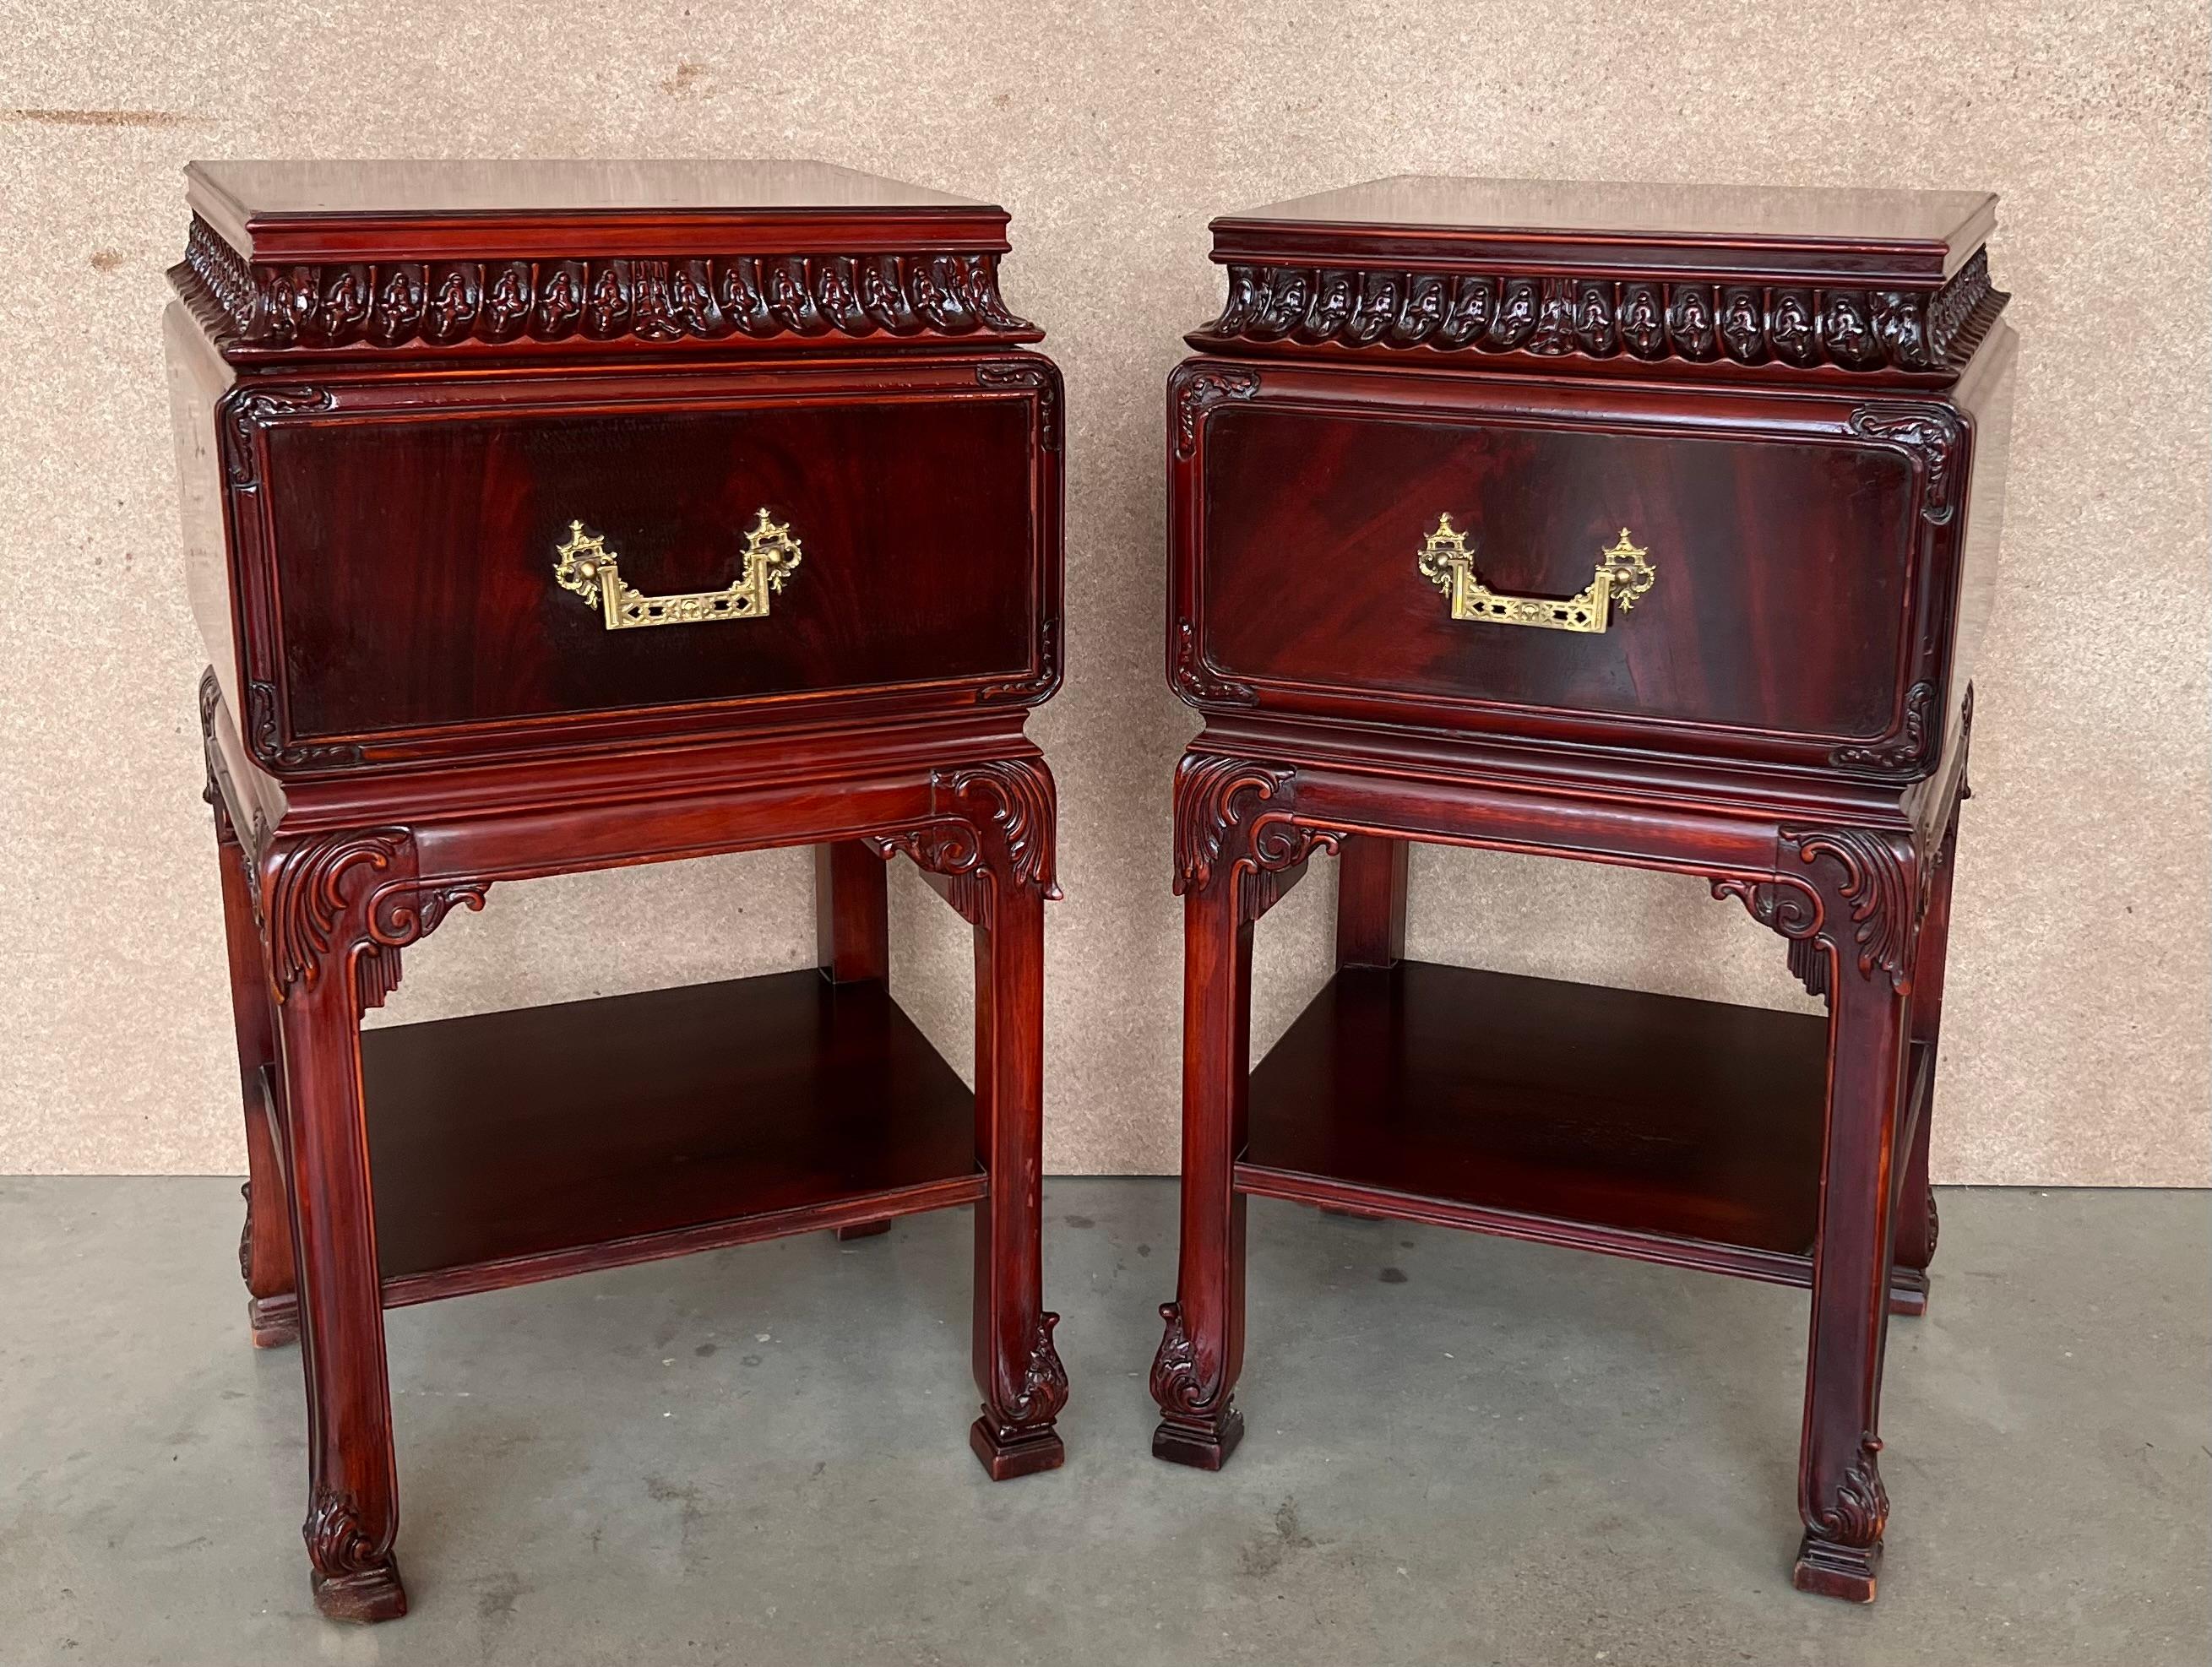 A pair of Henredon style Chinese chippendale carved mahogany chests in mahogany, fitted with etched brass oriental hardware. Exceptional workmanship with classic east Asian joinery and cabinetry, built to last for generations. Going with tradition